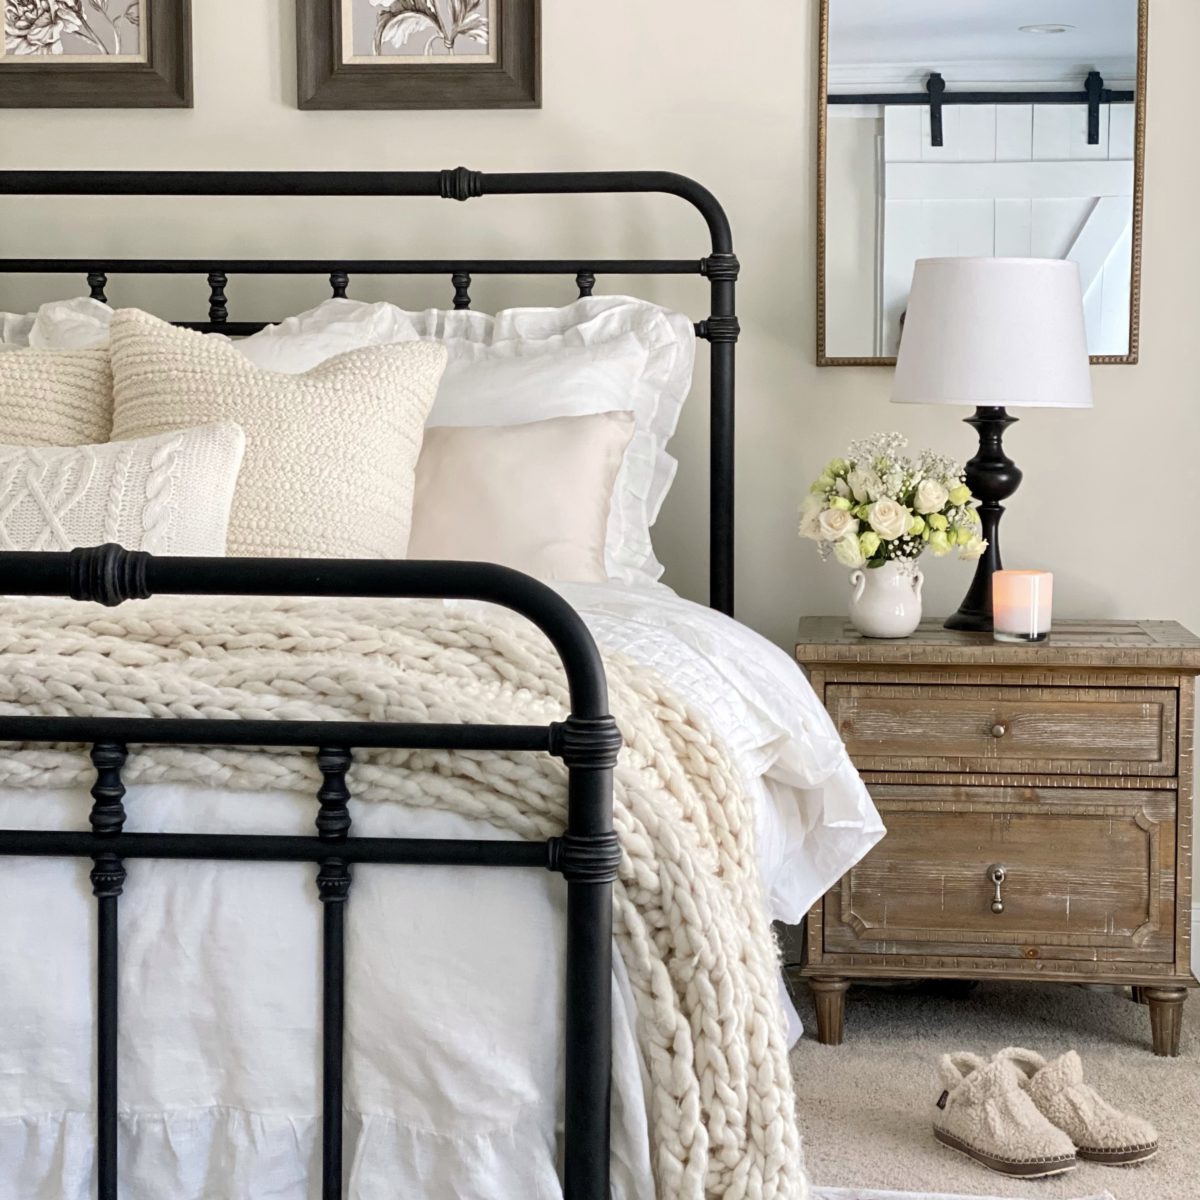 Iron bed with layered winter white bedding on it. There is a nightstand next to the bed with white flowers in a vase, a lamp, and a candle.